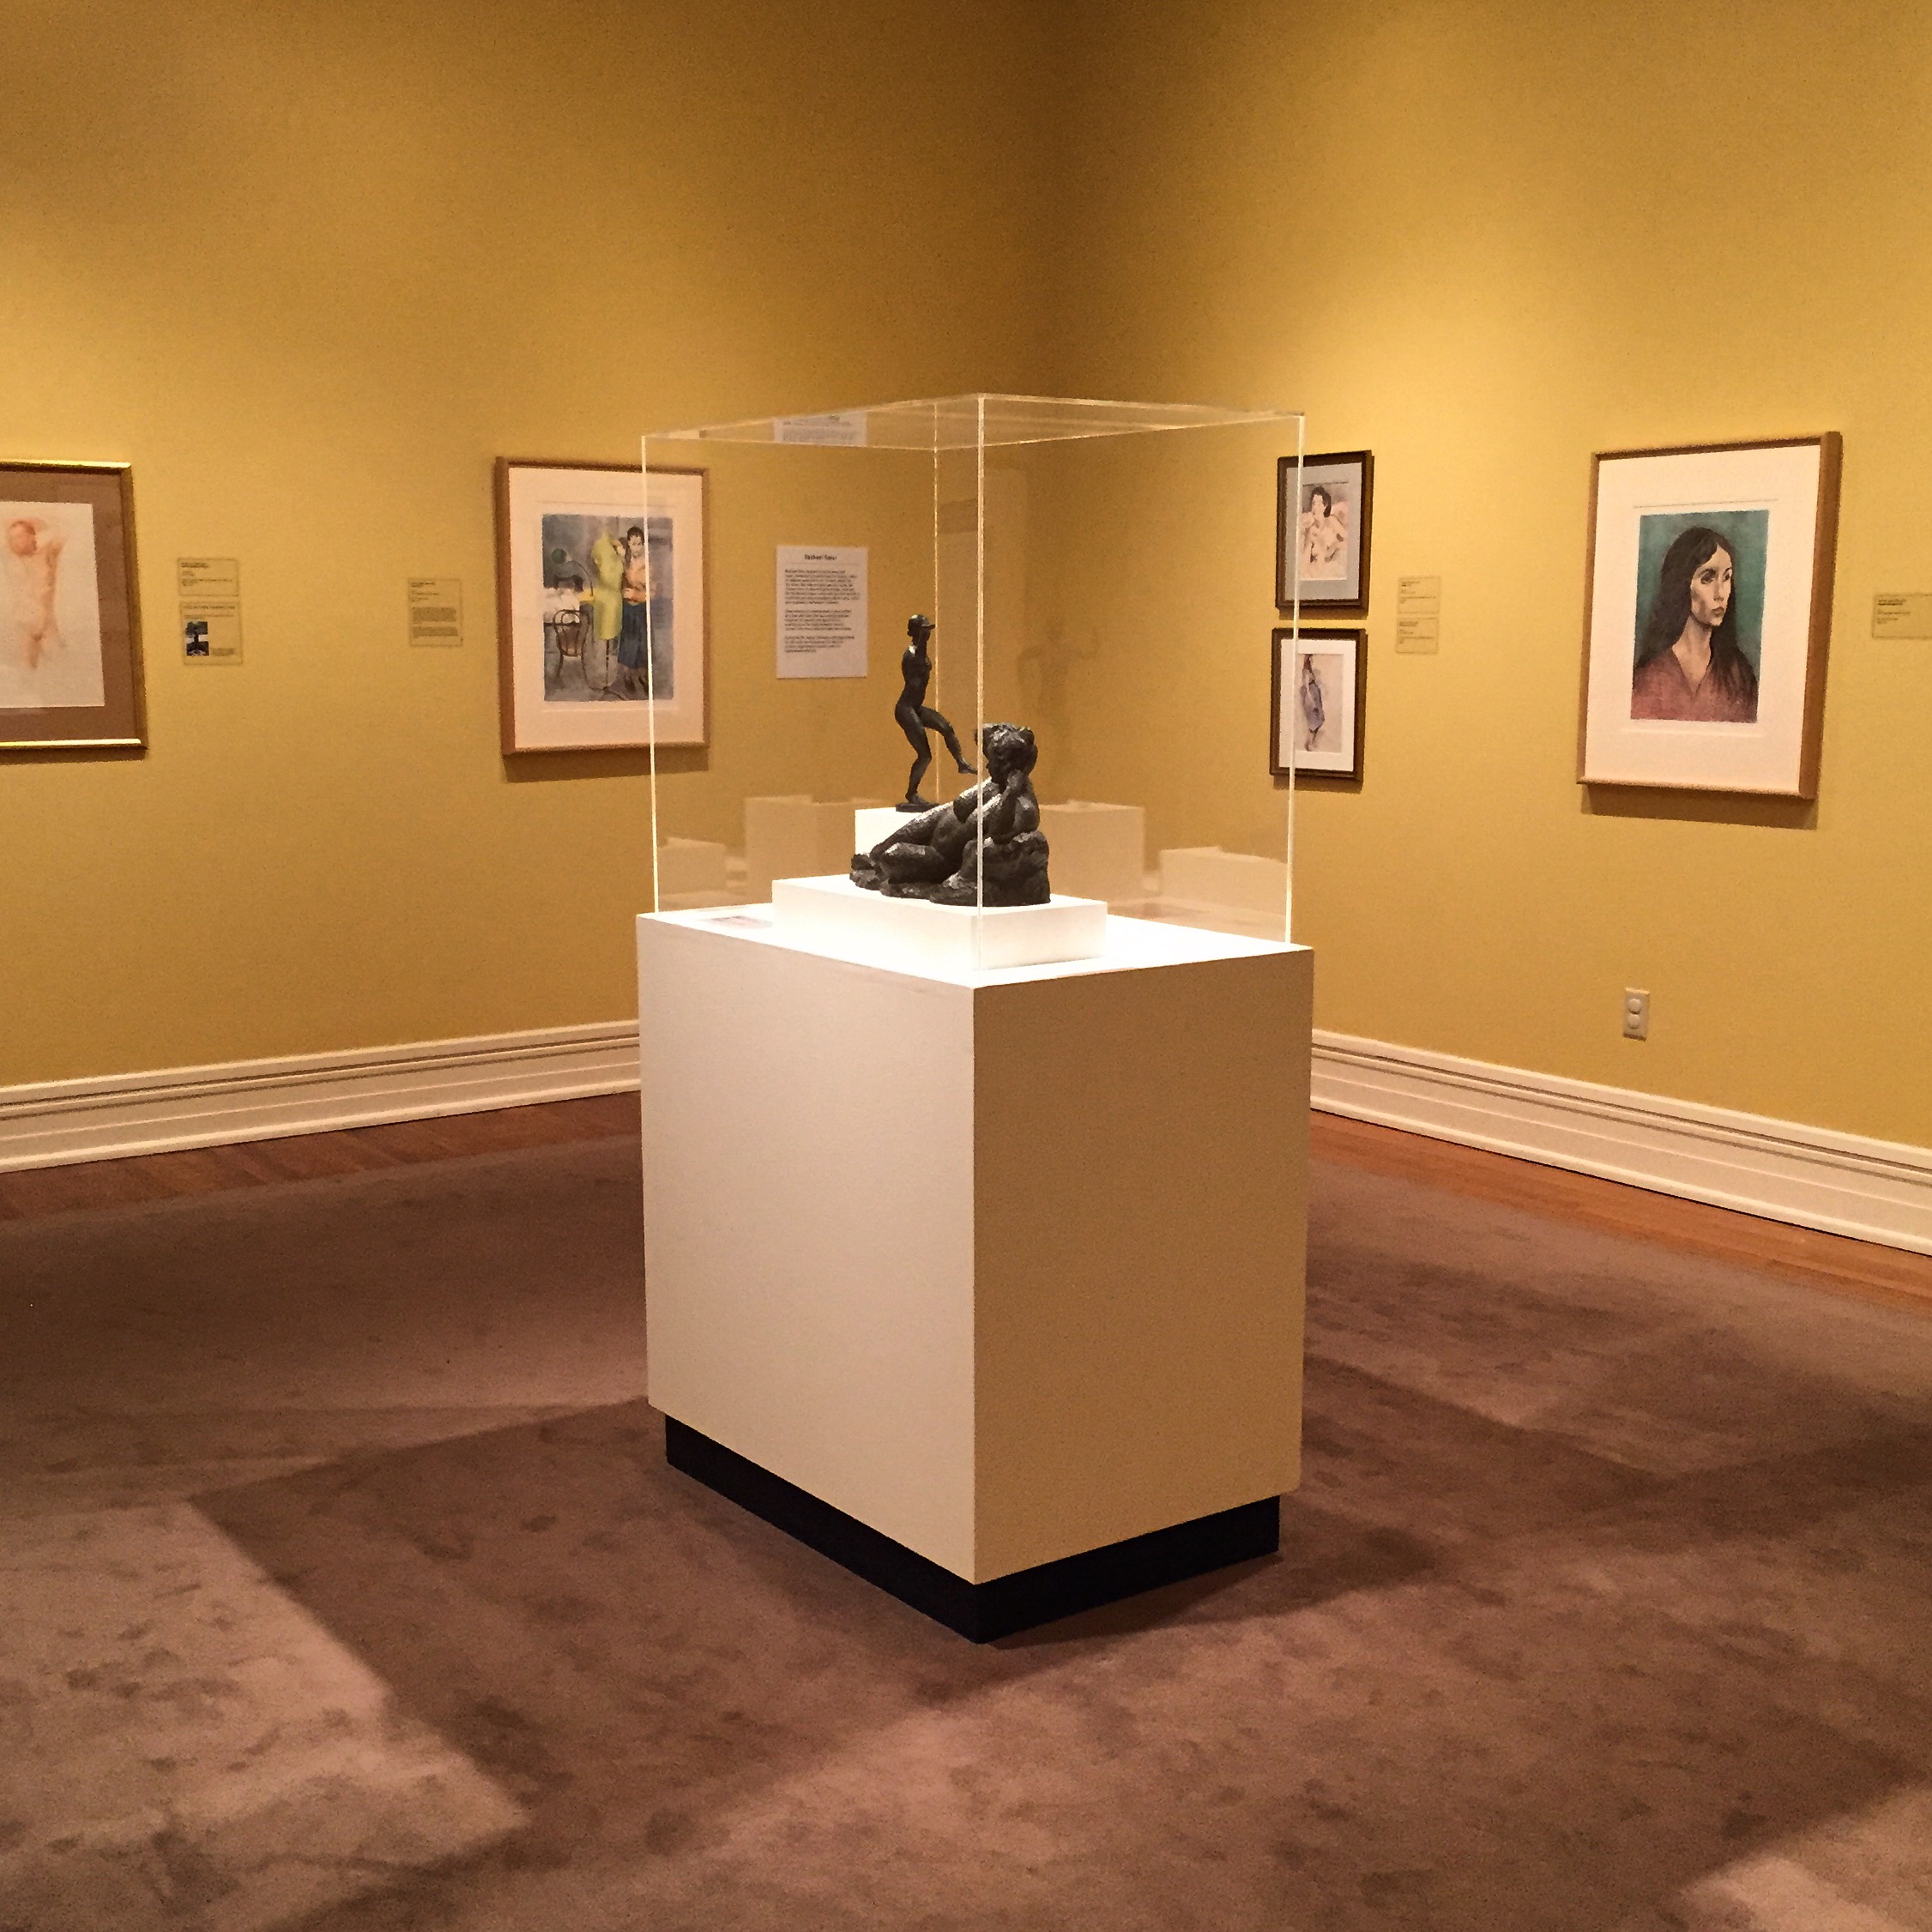 A gallery room with paintings on the wall and a glass case with a small sculpture.